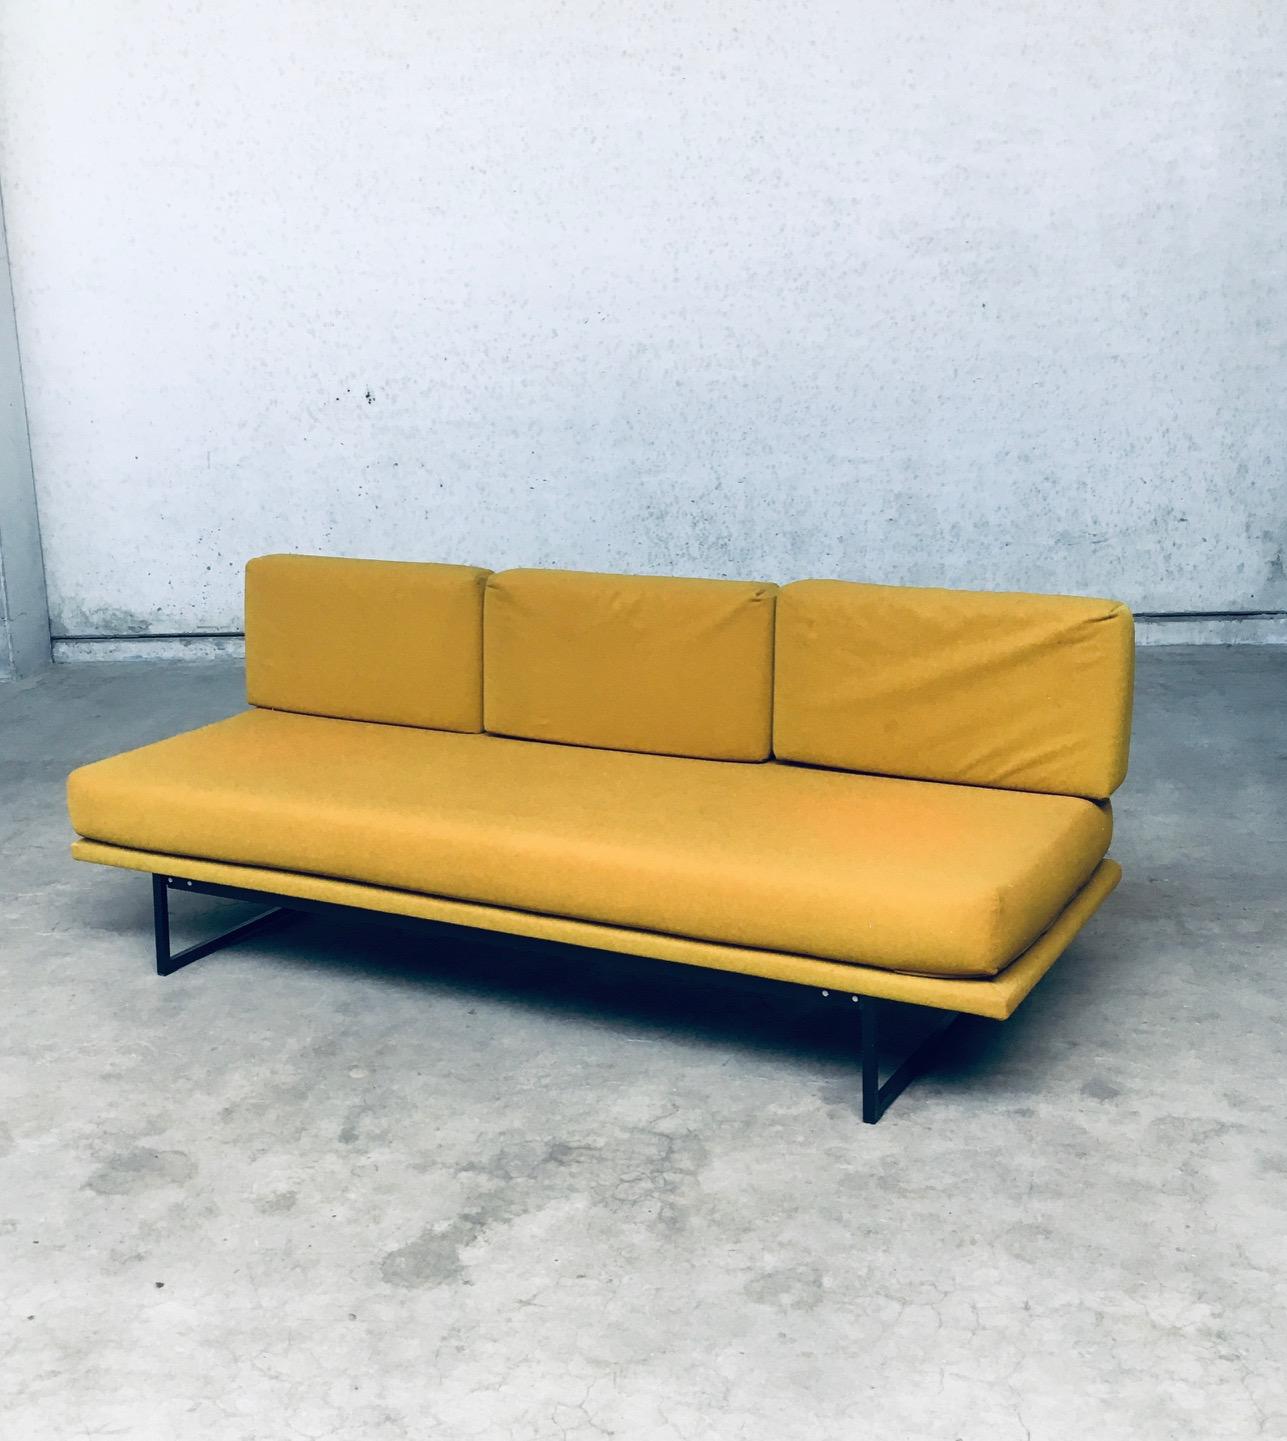 Vintage Midcentury Modern Dutch Design 3 Seat Sofa Bench, made in the Netherlands 1960's. Minimalist design on this low sofa or bench. All original ocre yellow cushions and coverings on black metal frame. In very good, original condition. Slight